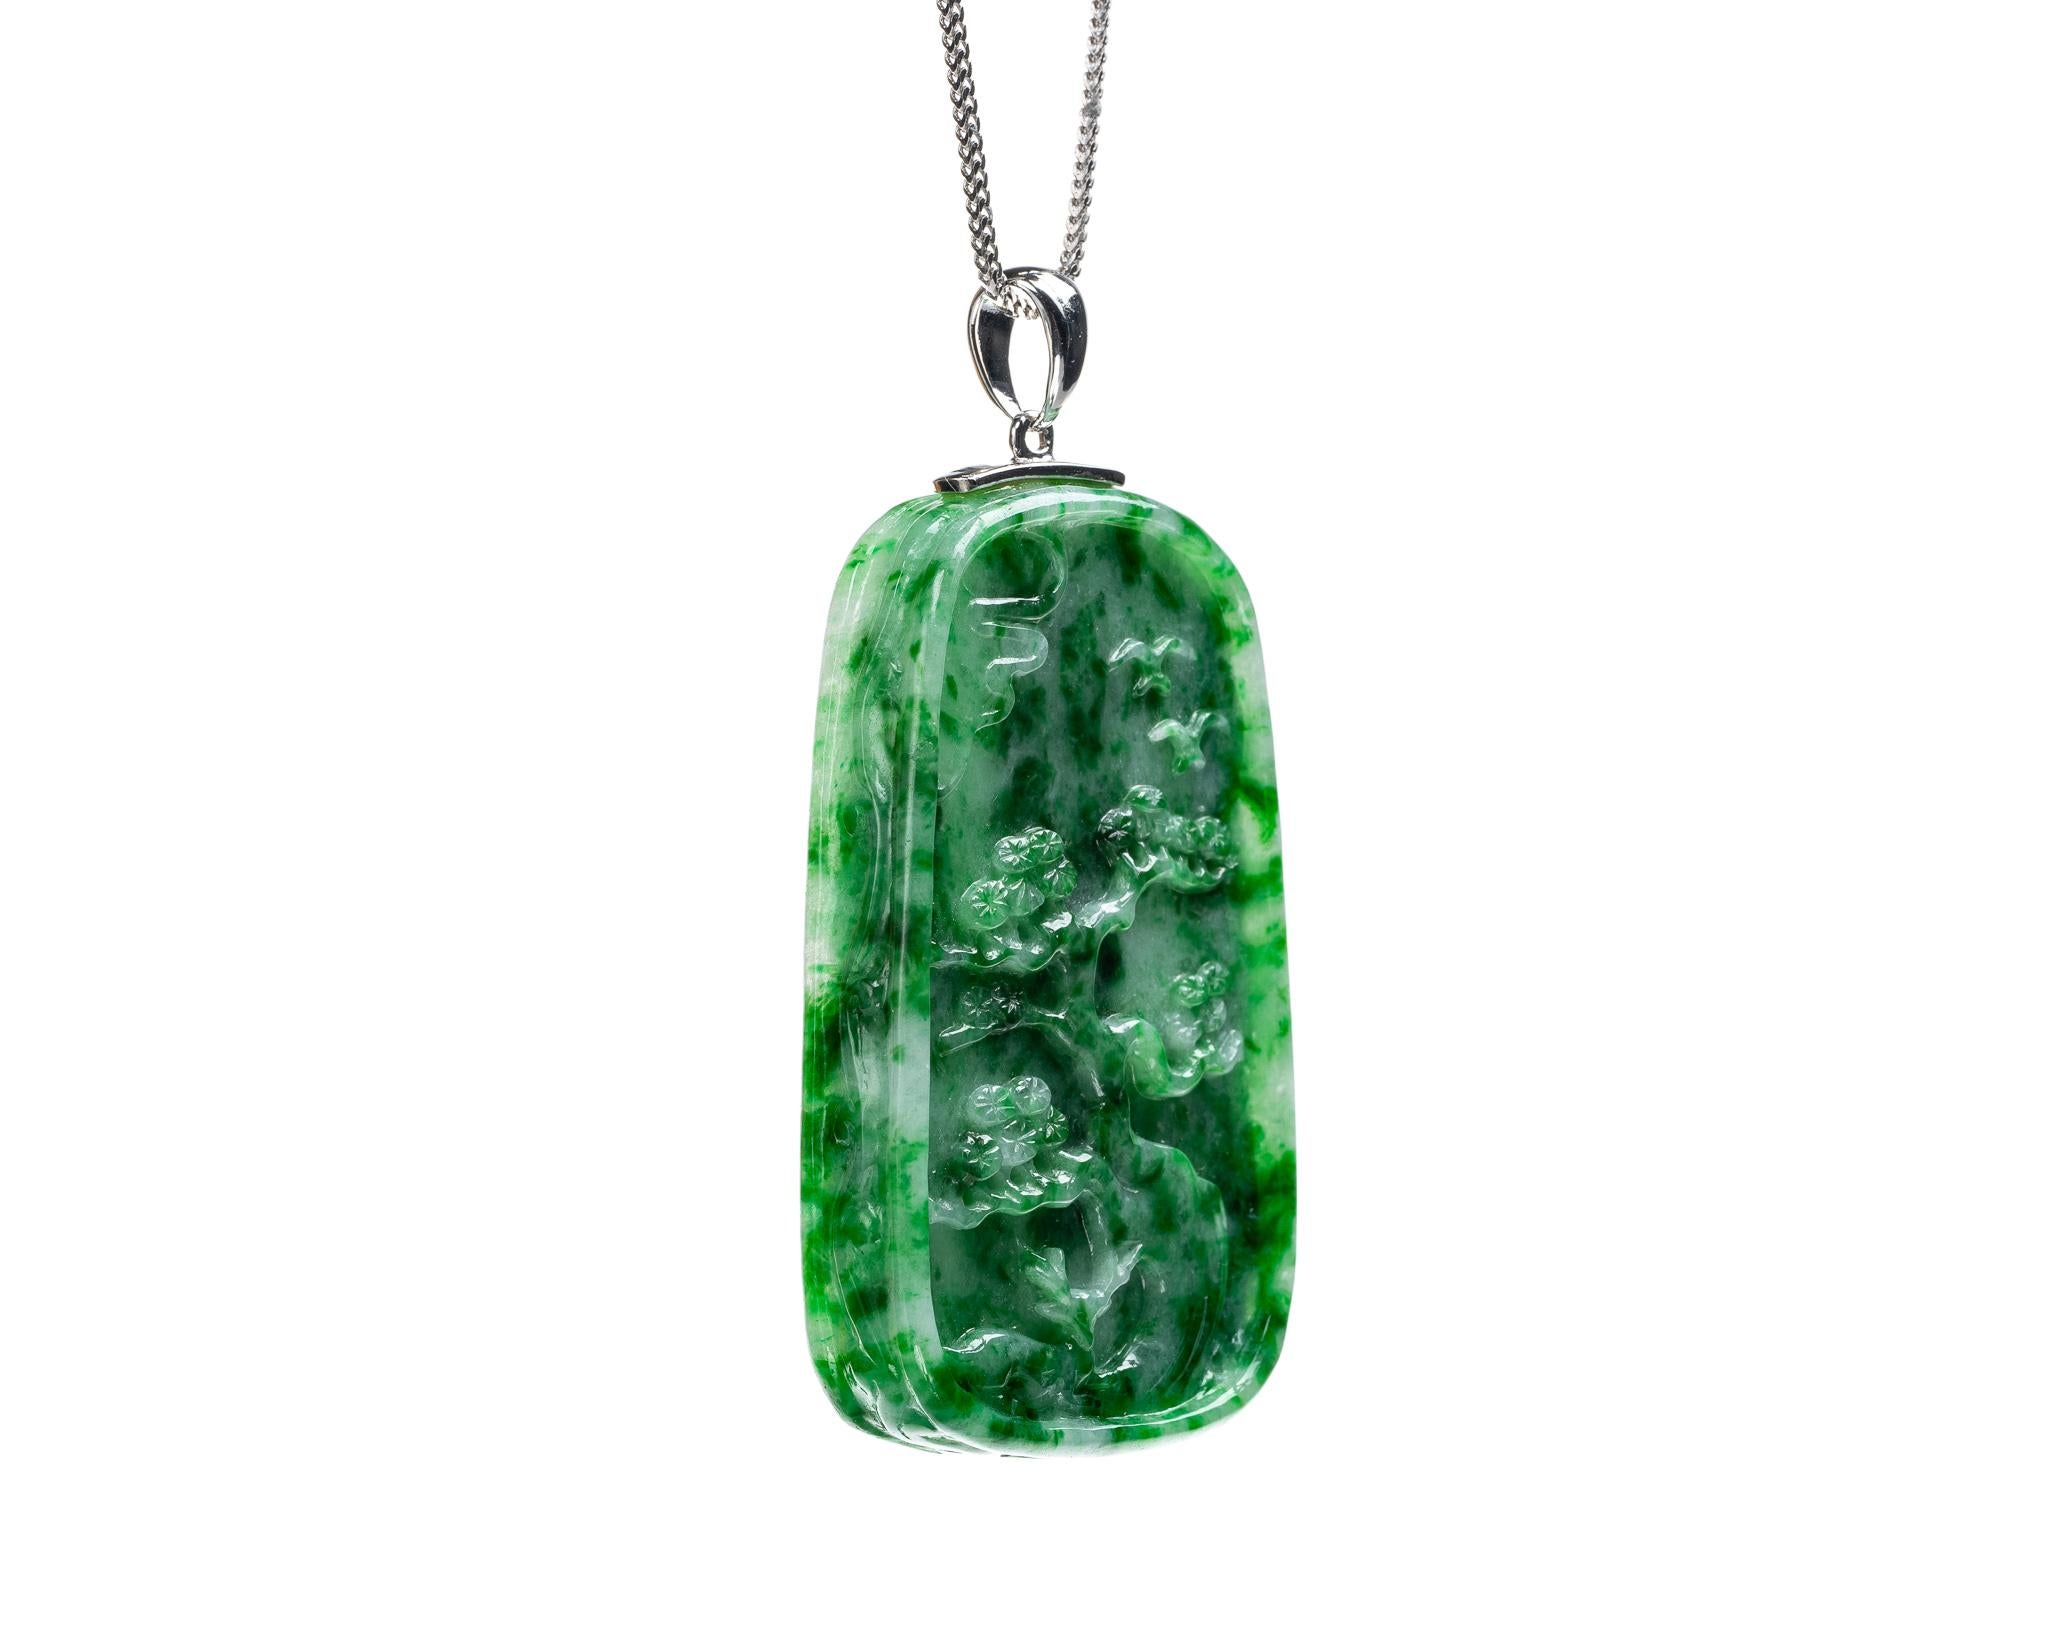 This is an all natural, untreated jadeite jade carved bamboo pendant set on an 18K white gold bail.  The carved bamboo symbolizes strength, growth and resilience.   

It measures 1.09 inches (27.8 mm) x 1.83 inches (46.5 mm) with thickness of 0.28